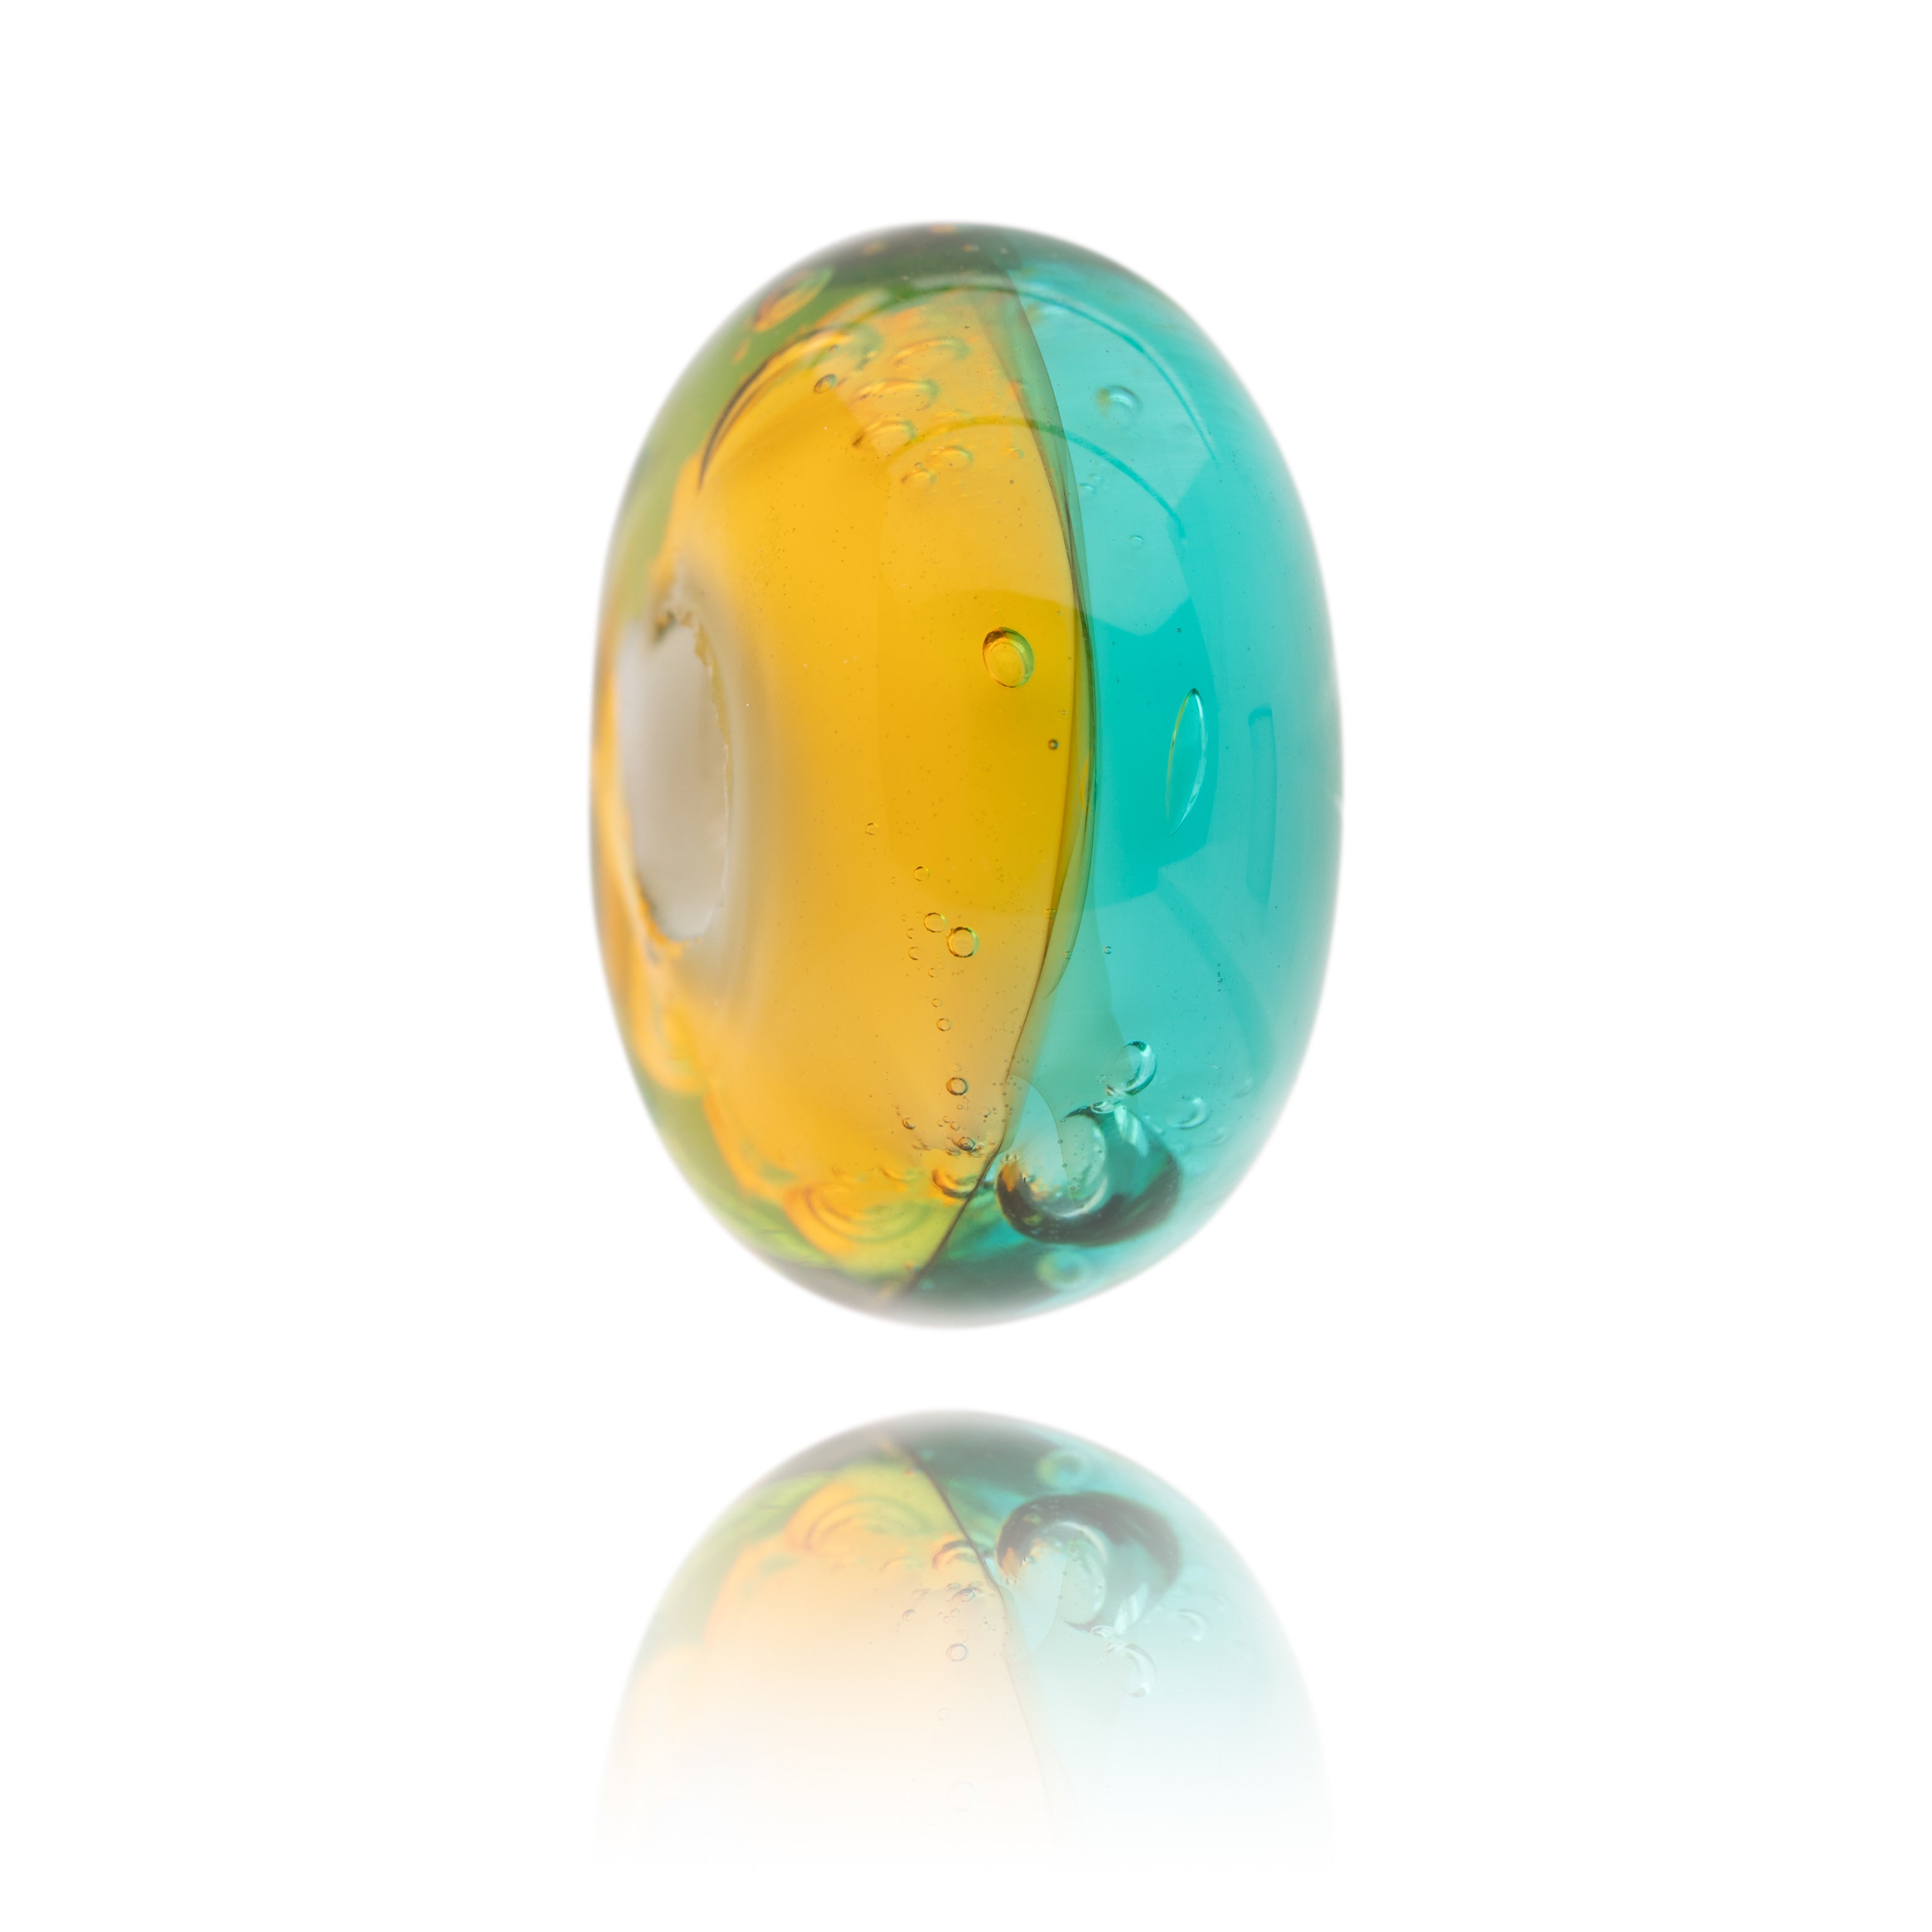 Teal and yellow Murano glass bead with bubbles in glass for Mothecombe beach South Devon.